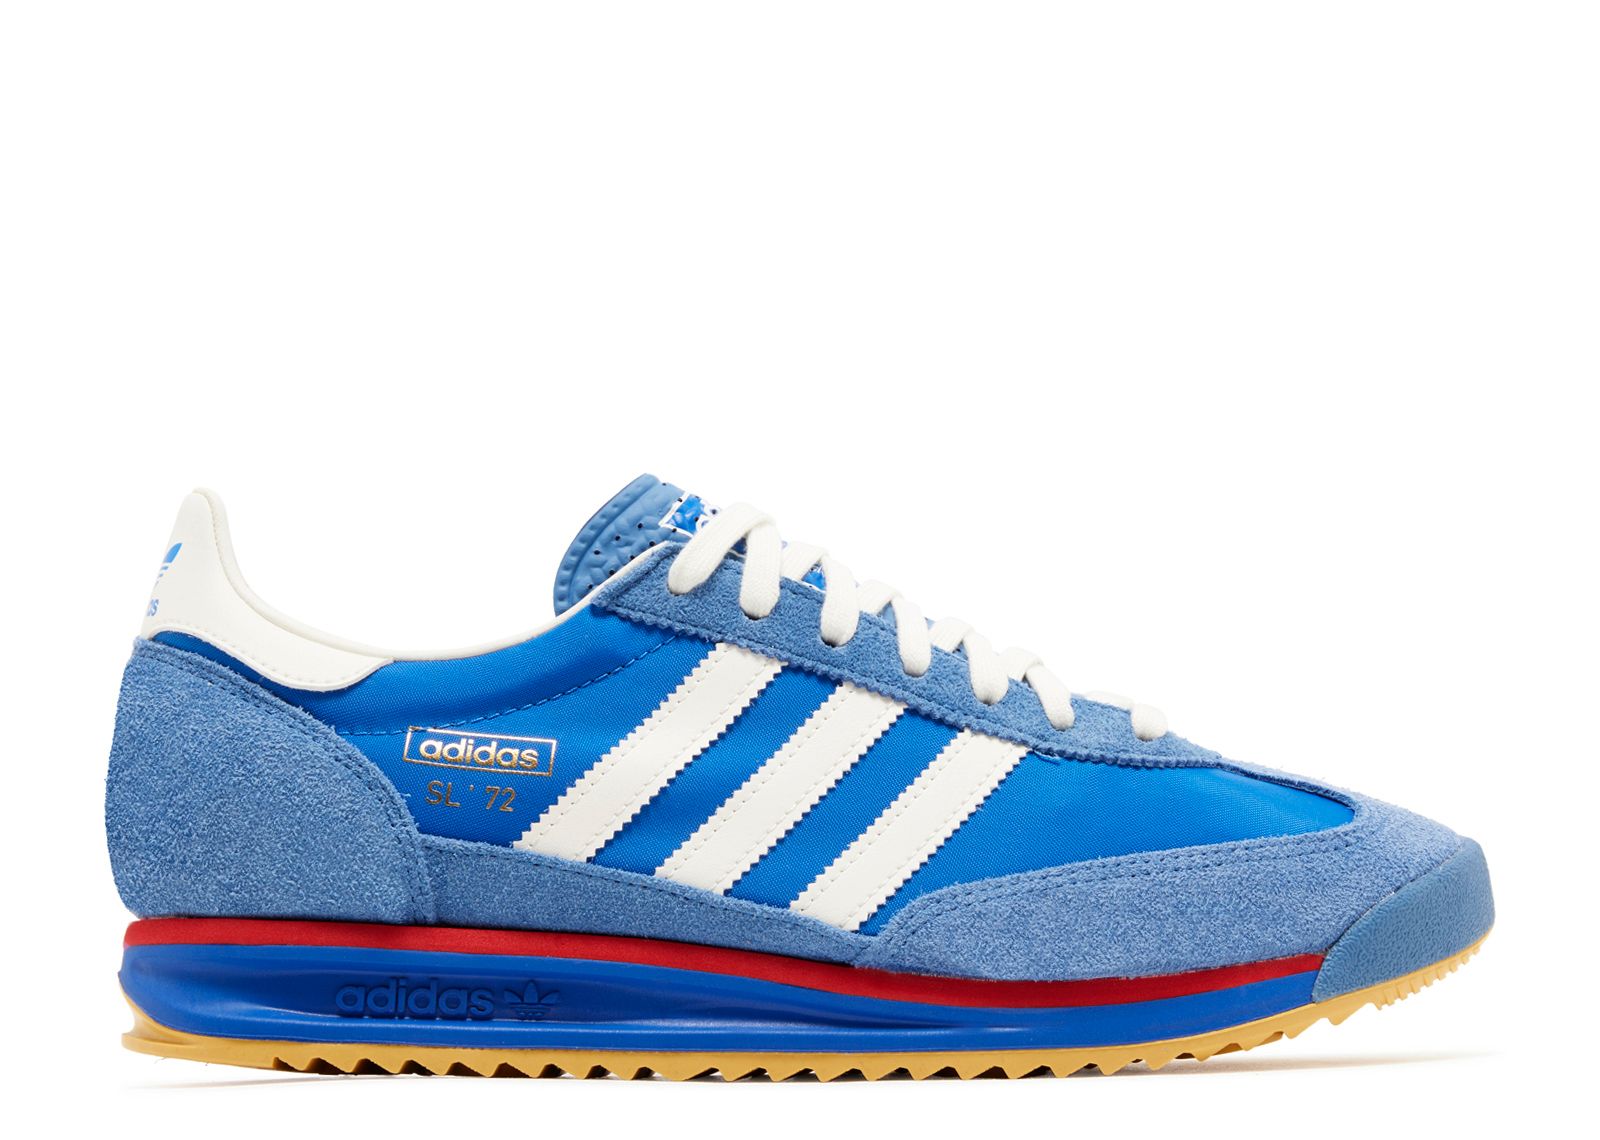 SL72 RS 'Blue Scarlet' - Adidas - IG2132 - blue/core white/better ...